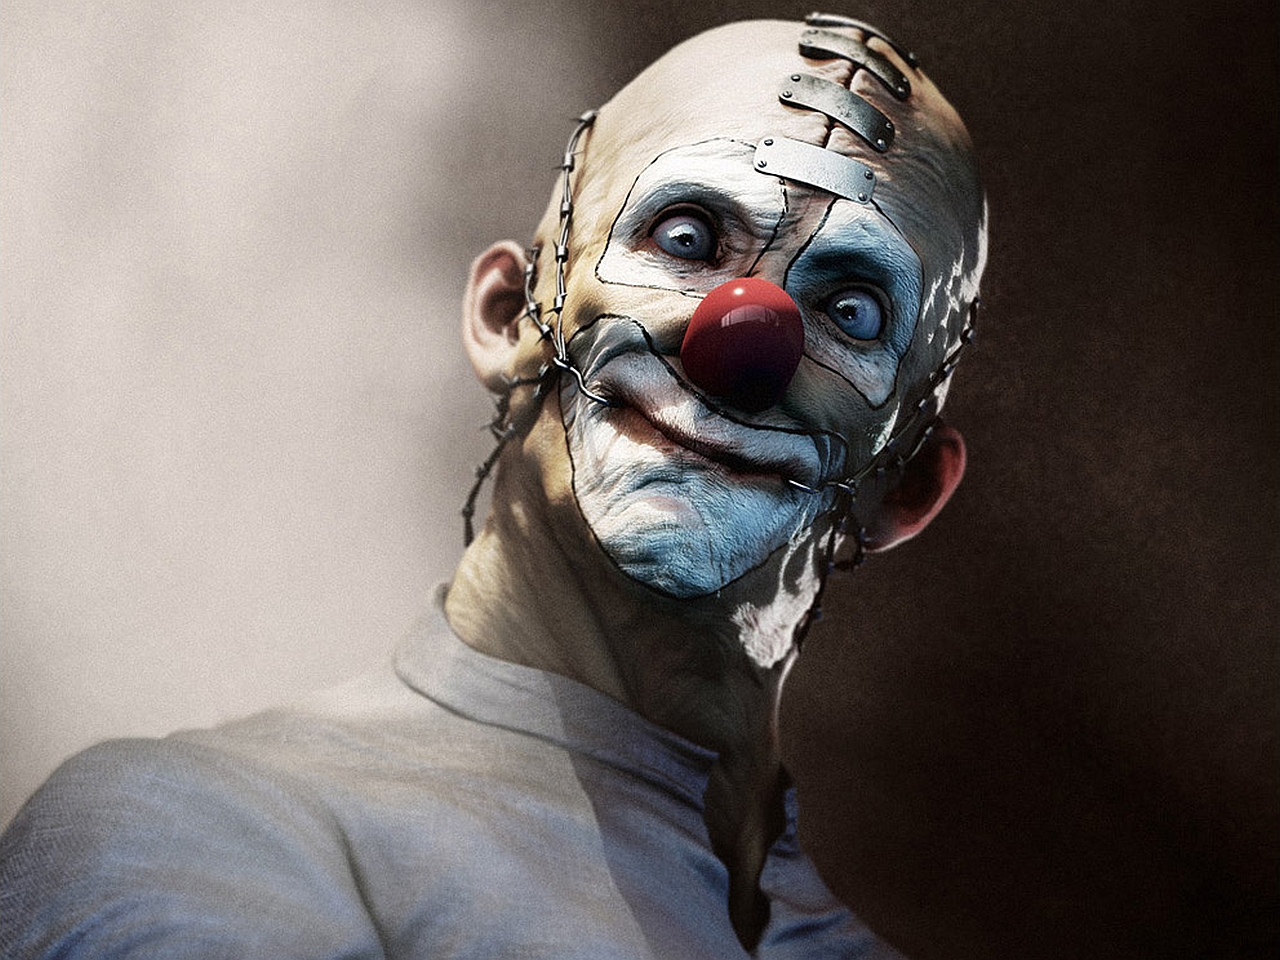 Scary Clown Wallpaper Related Keywords amp Suggestions